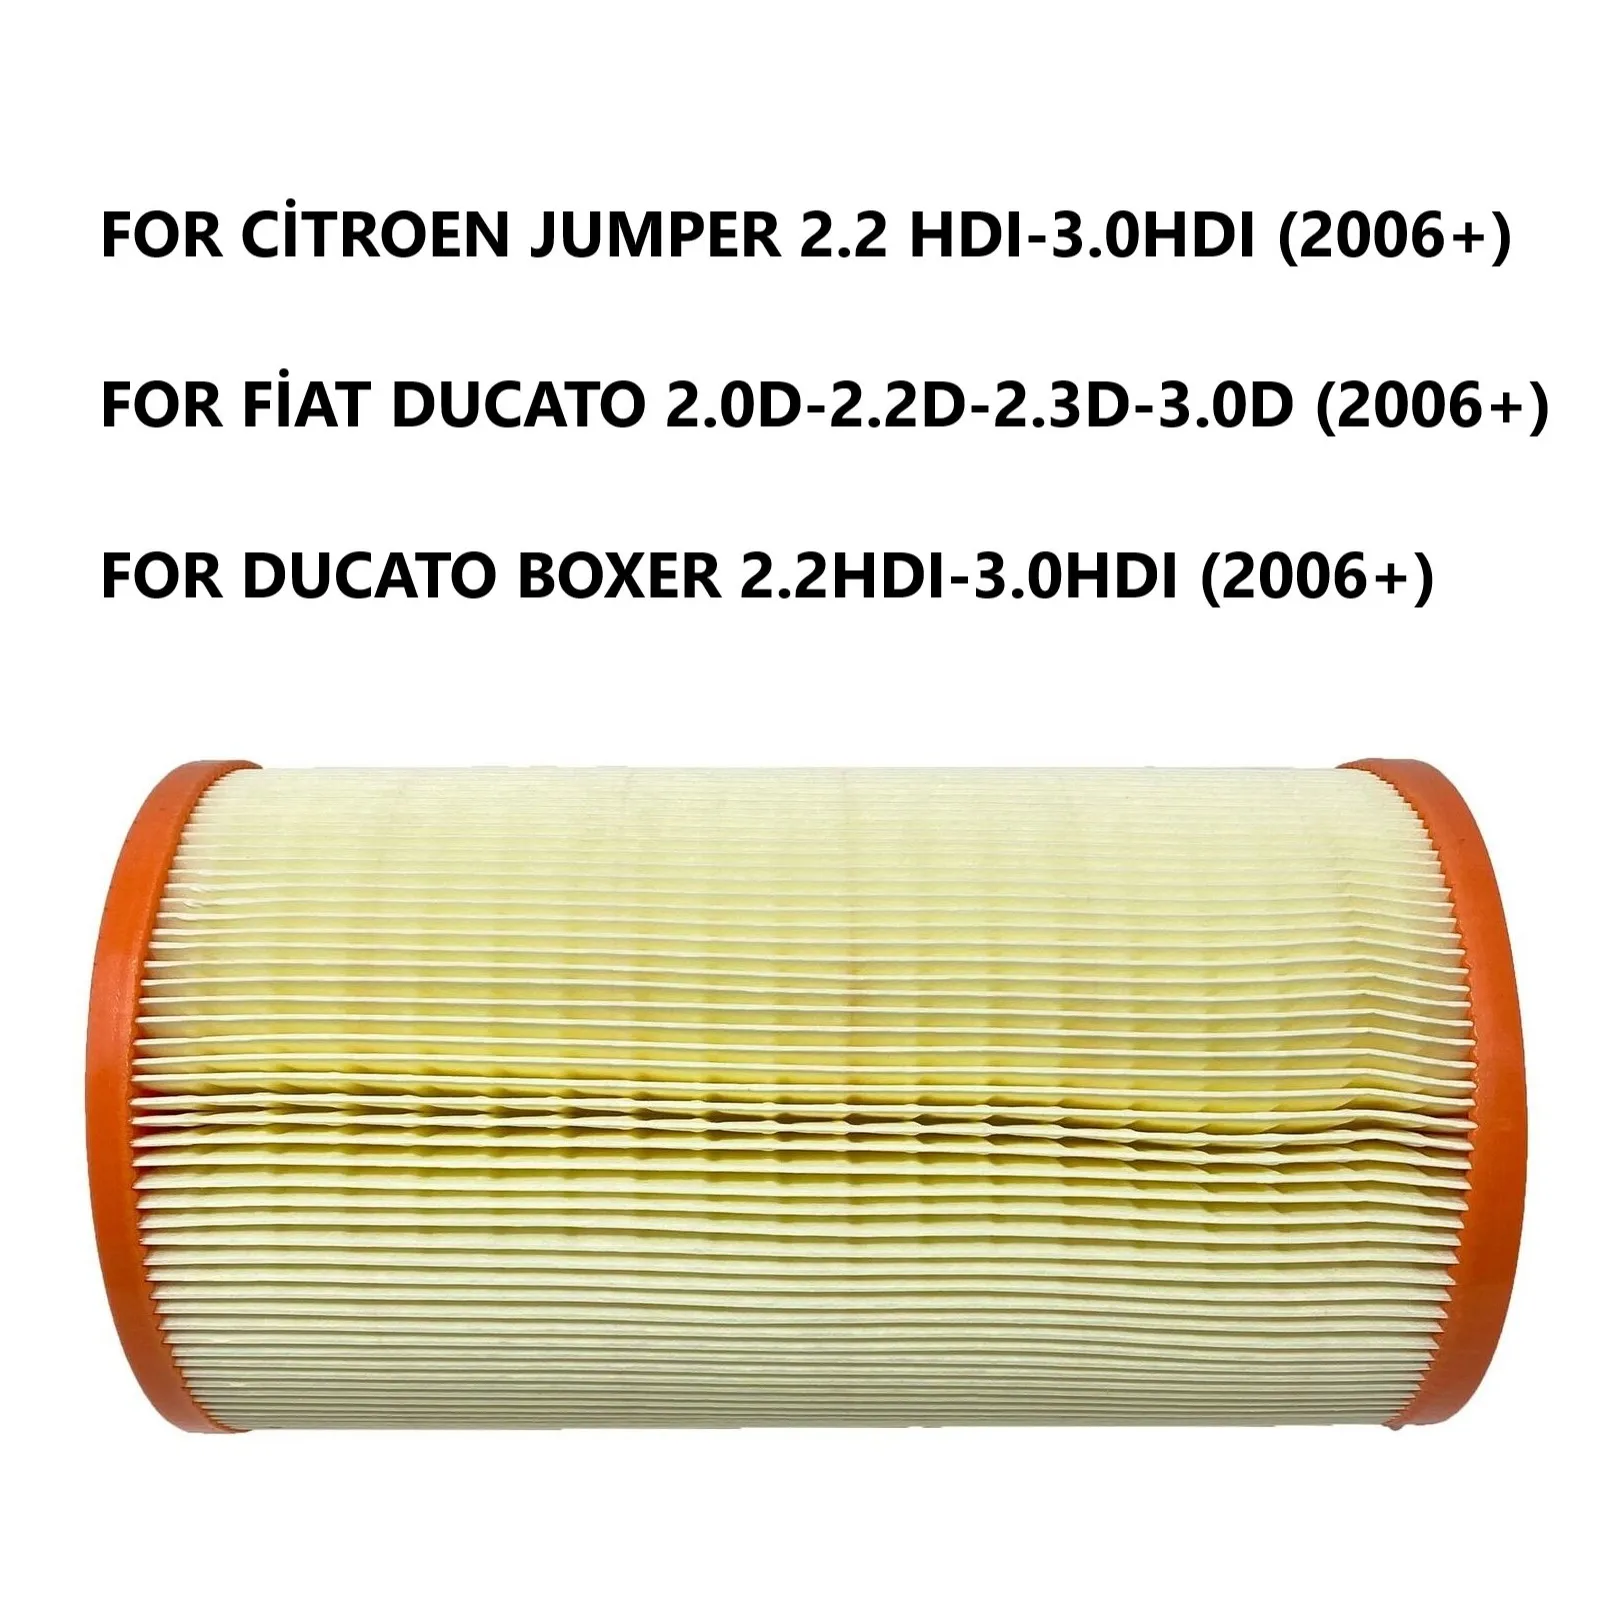 

Air Filter For Fiat Ducato 2.0D-2.2D-2.3D (For Citroen Jumper 2.2HDI-3.0HDI) (For Peugeot Boxer 2.2HDI-3.0 HDI) 2006 Onwards